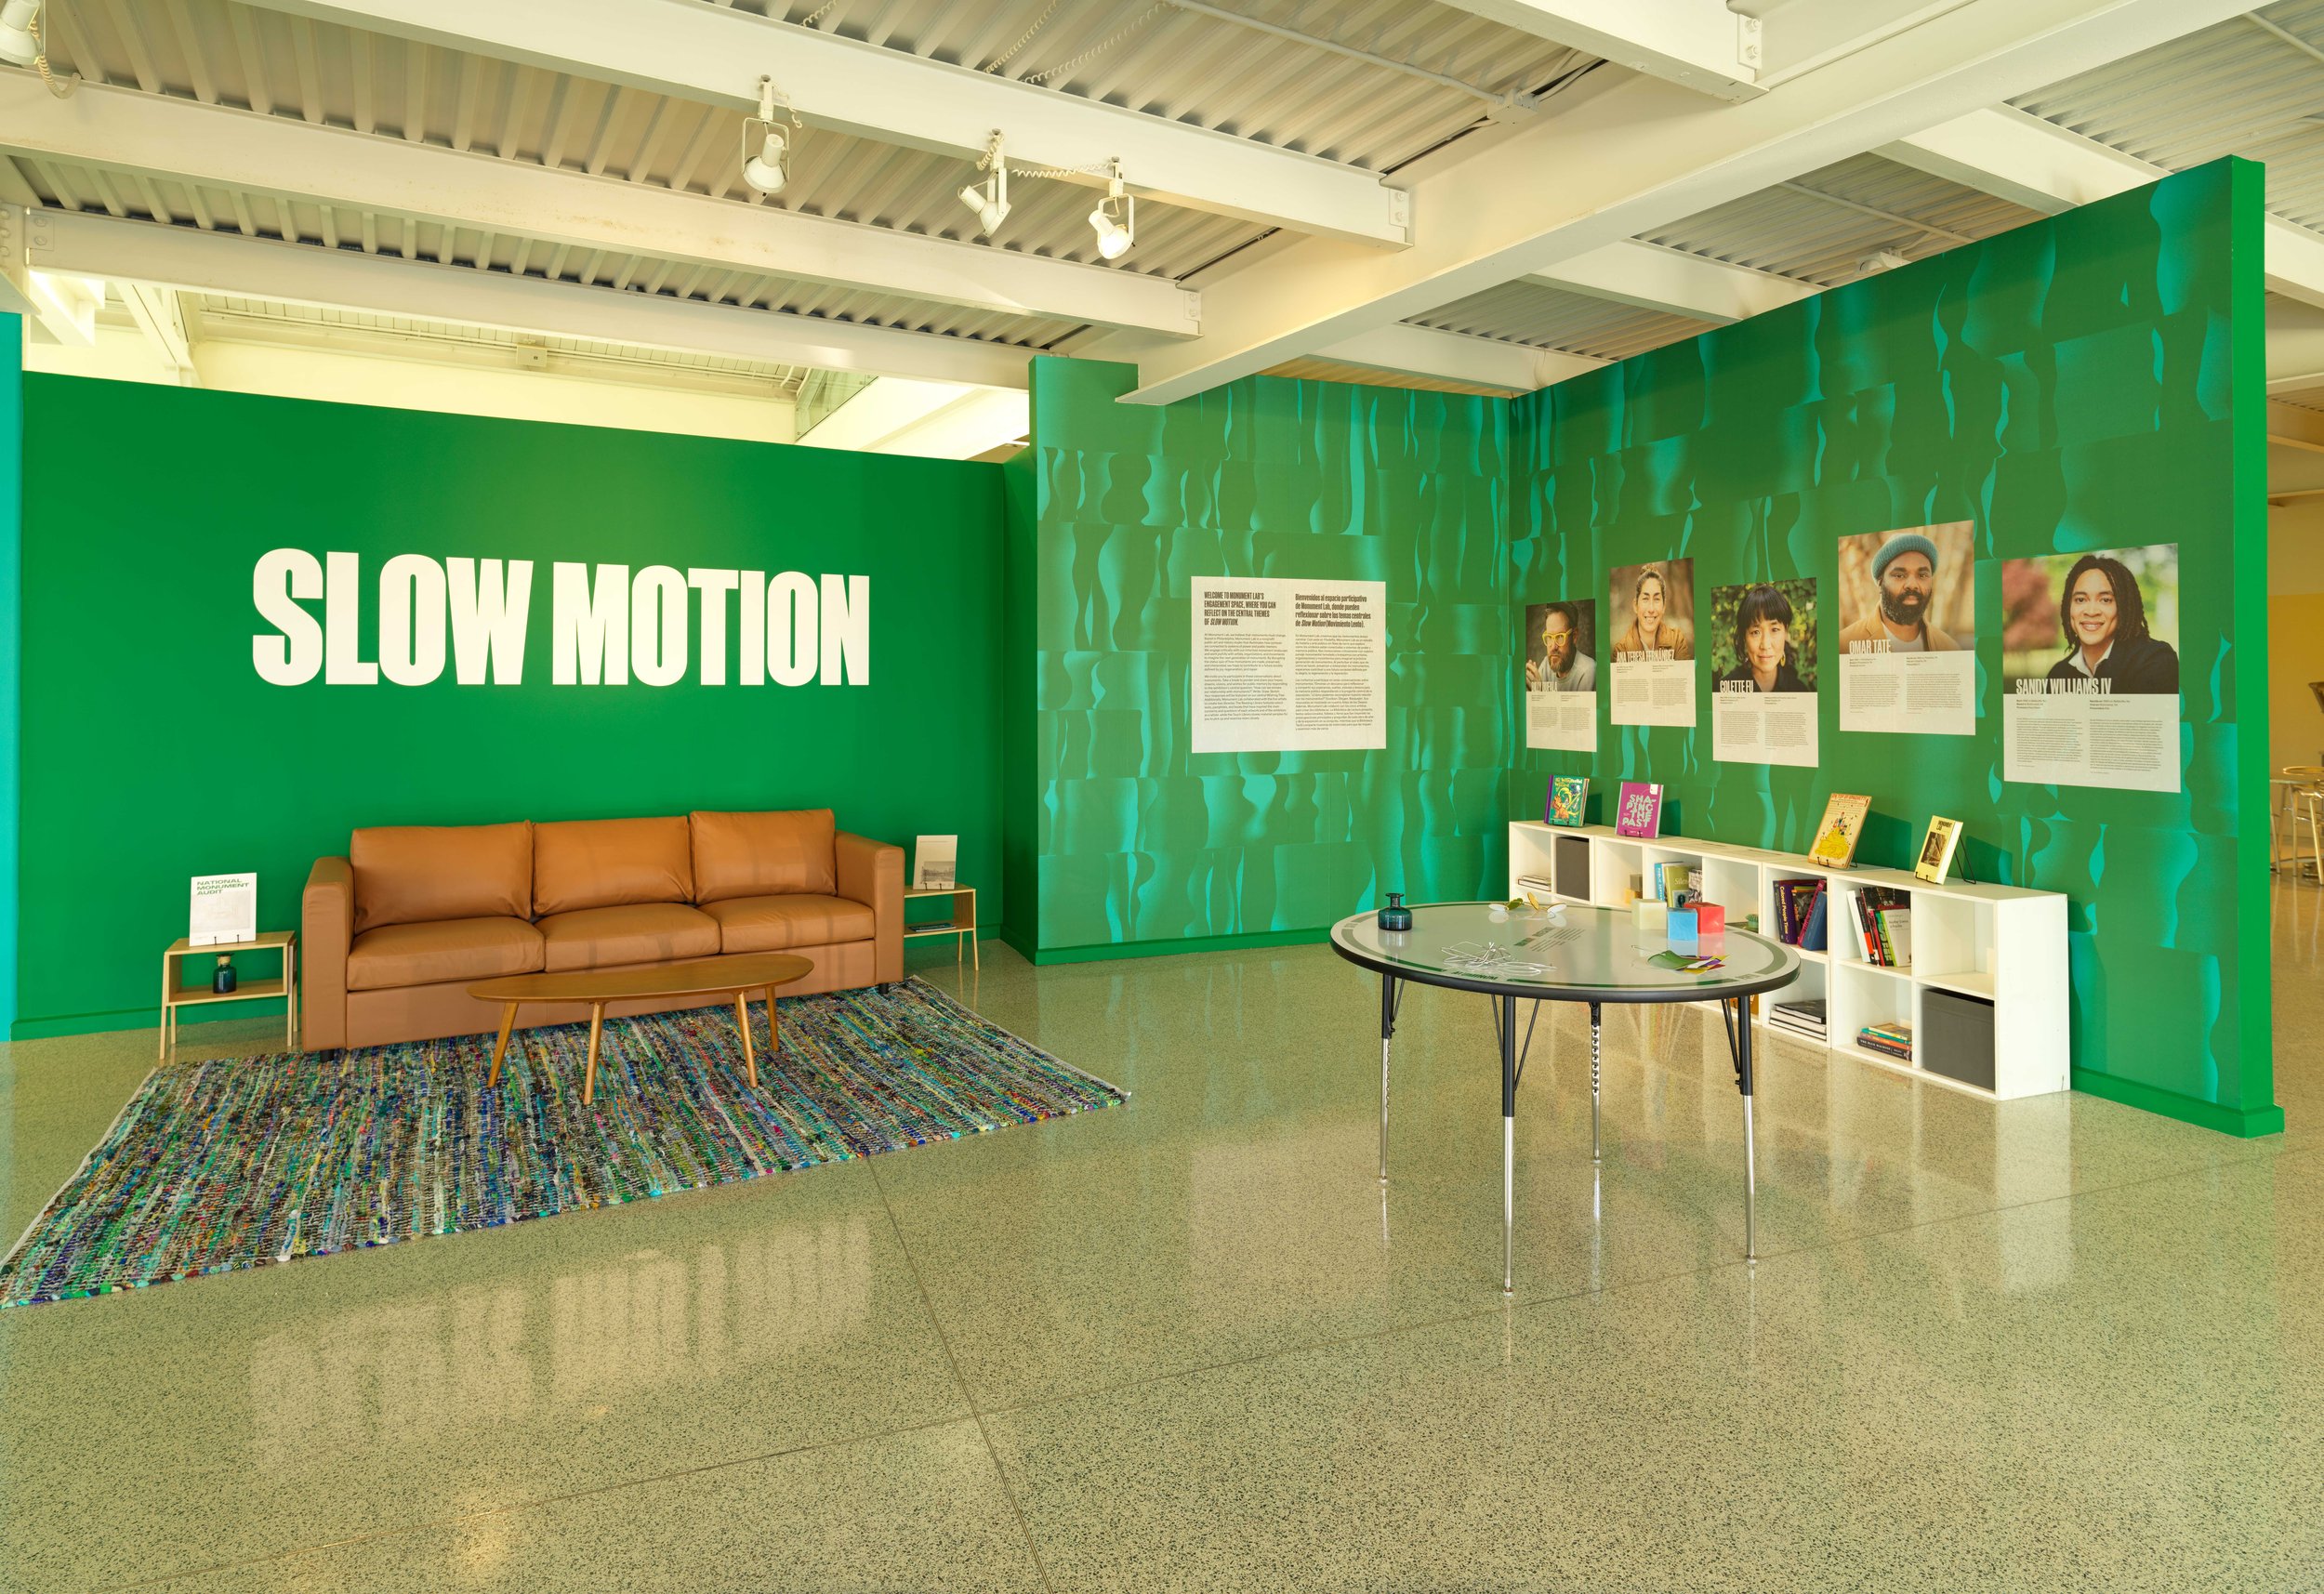 Slow Motion exhibition engagement space, Grounds for Sculpture, Hamilton, New Jersey, Slow Motion curated by Monument Lab (photo: Bruce M. White)